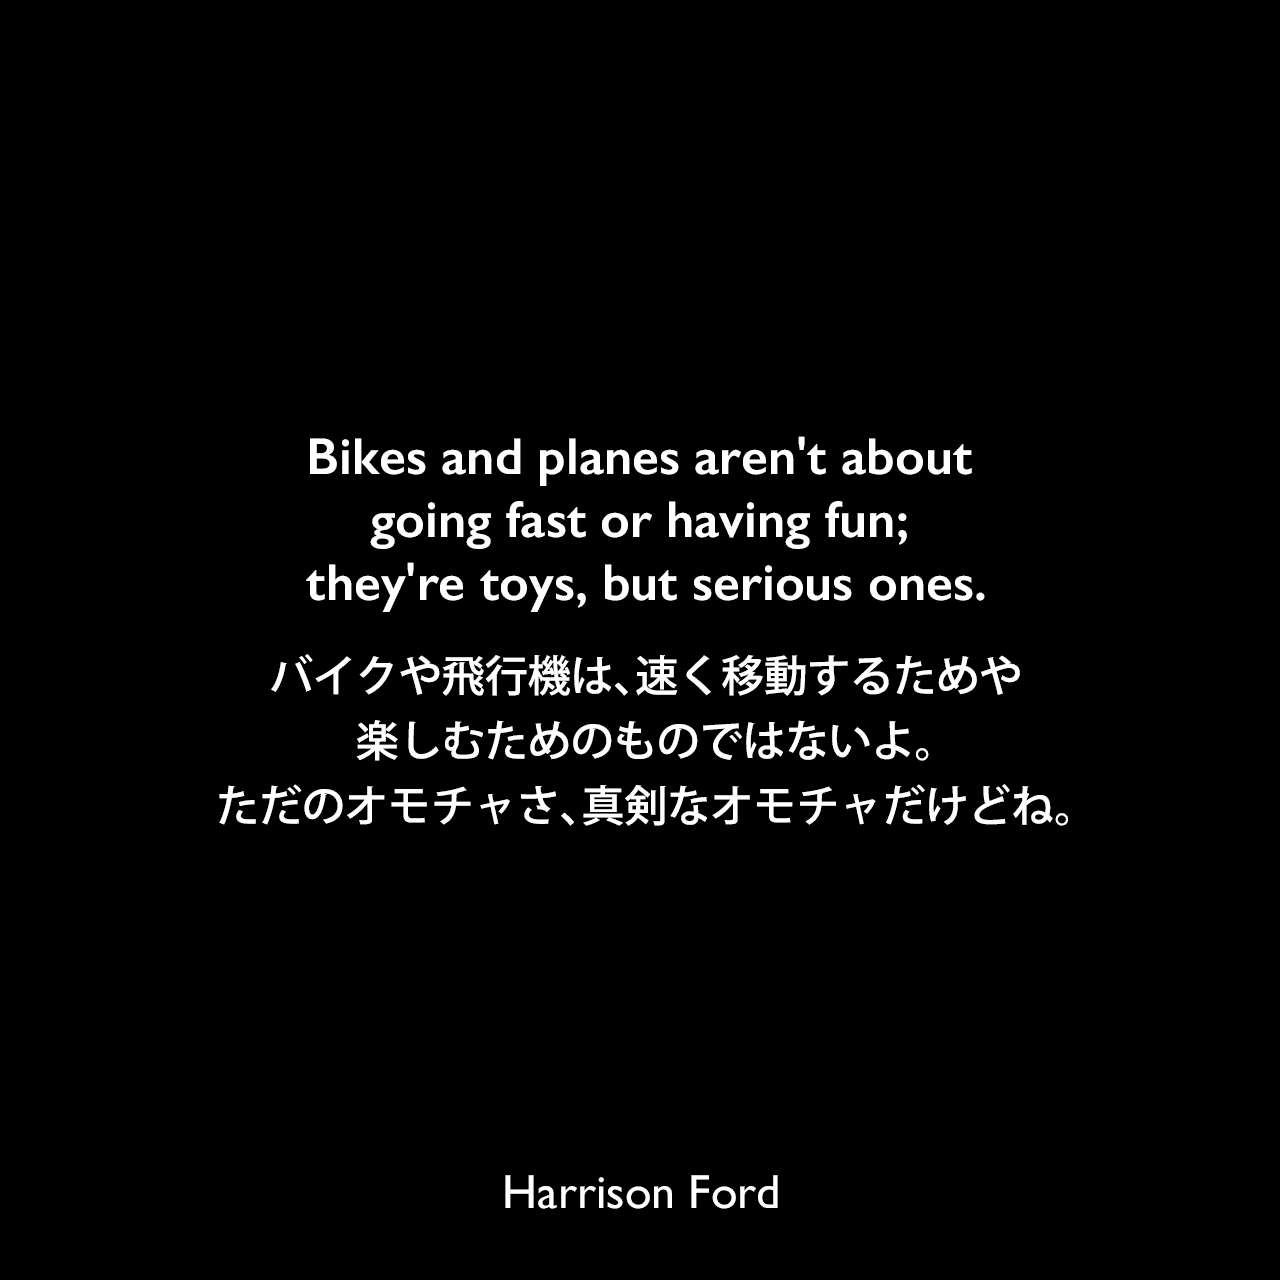 Bikes and planes aren't about going fast or having fun; they're toys, but serious ones.バイクや飛行機は、速く移動するためや楽しむためのものではないよ。ただのオモチャさ、真剣なオモチャだけどね。Harrison Ford